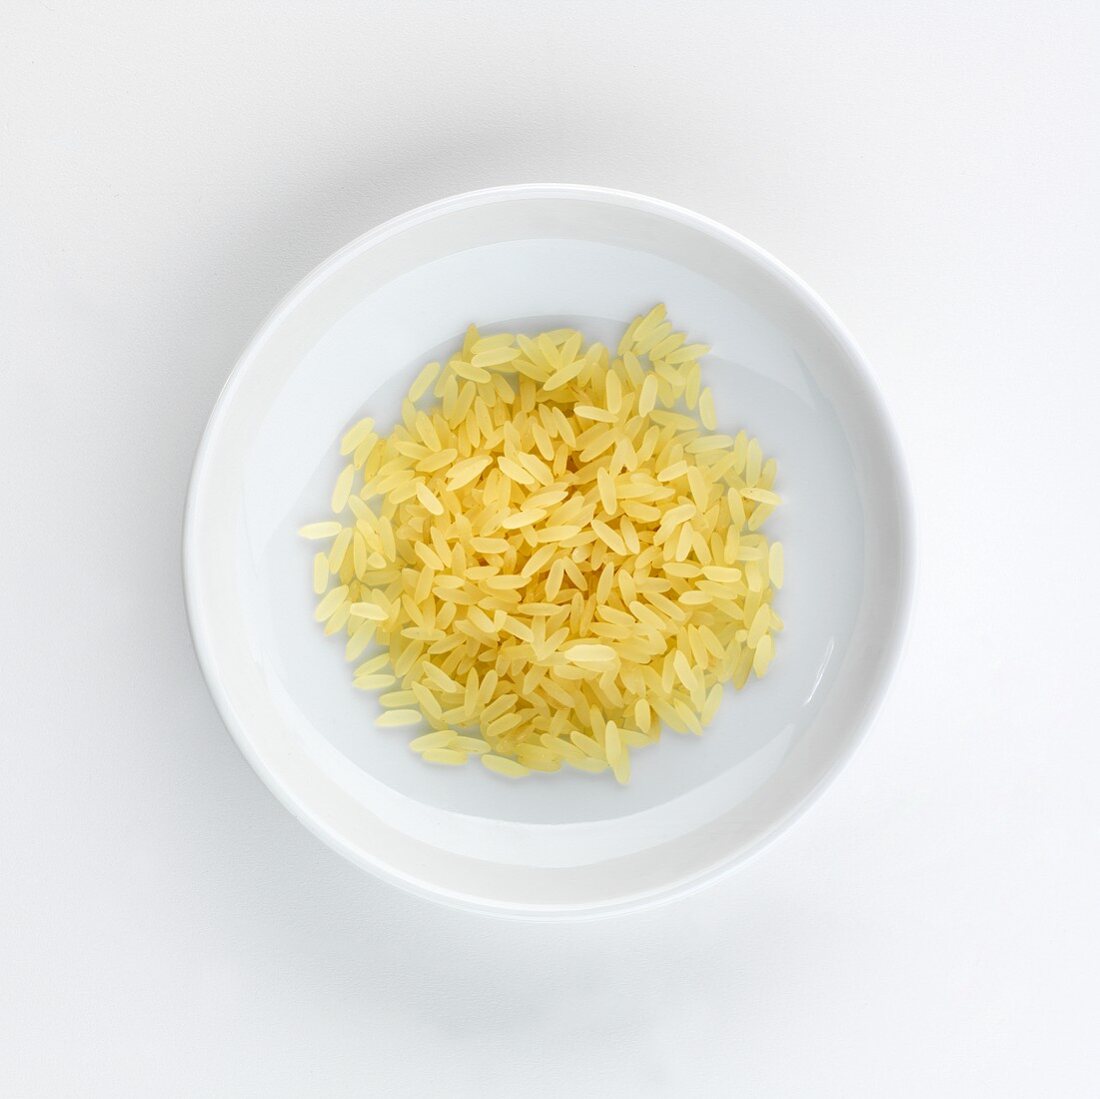 A plate of long grain rice, seen from above